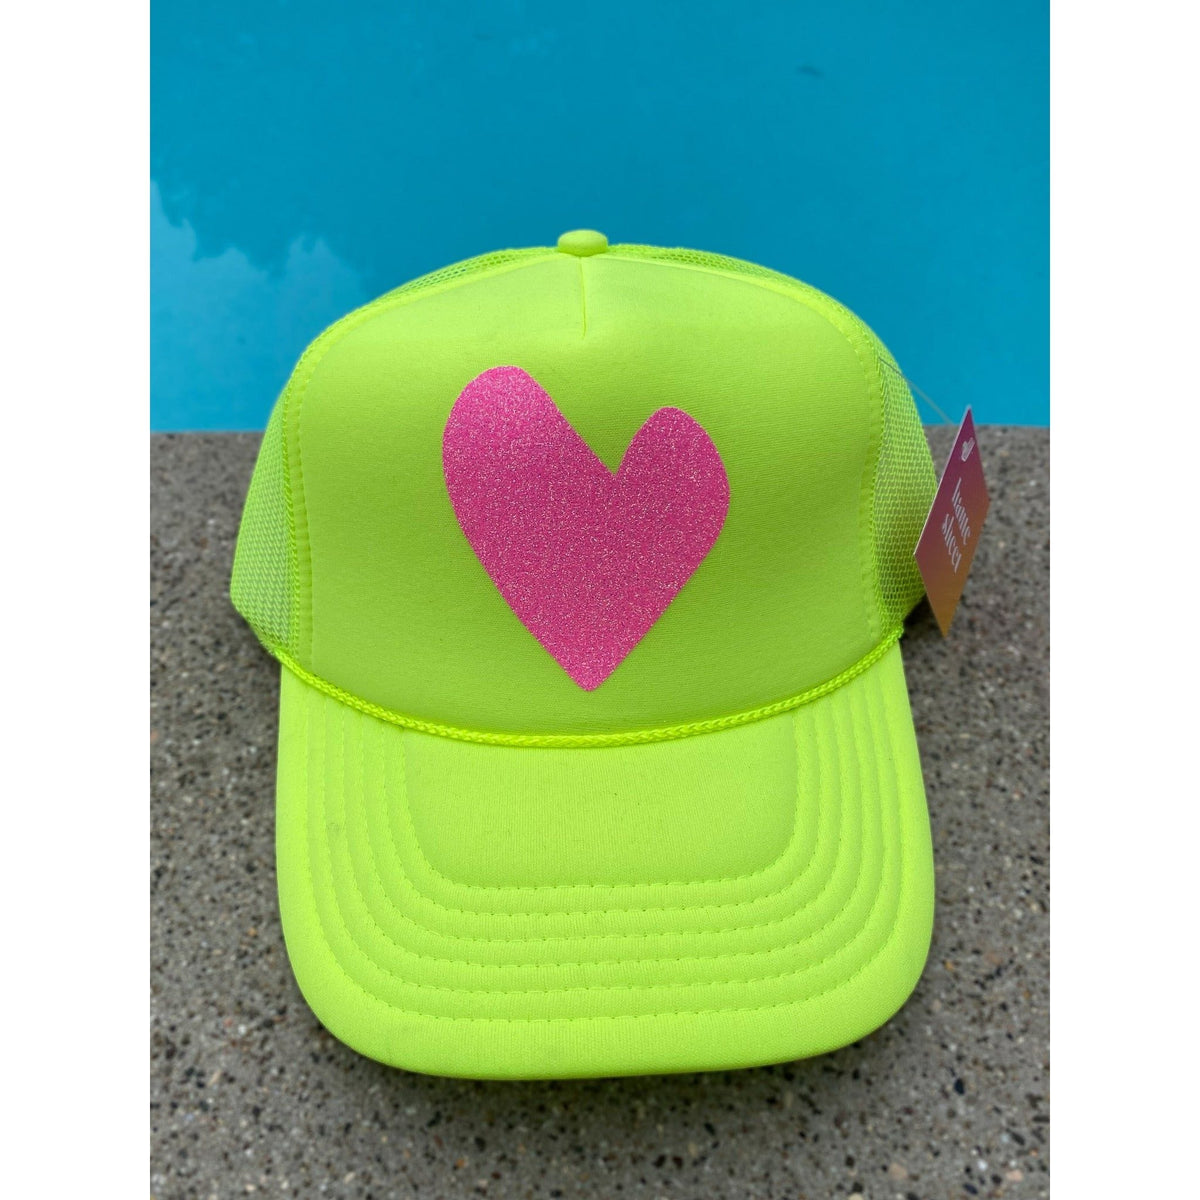 I Heart You | Gold and Pink Trucker Hat by Haute Sheet Hats TheFringeCultureCollective